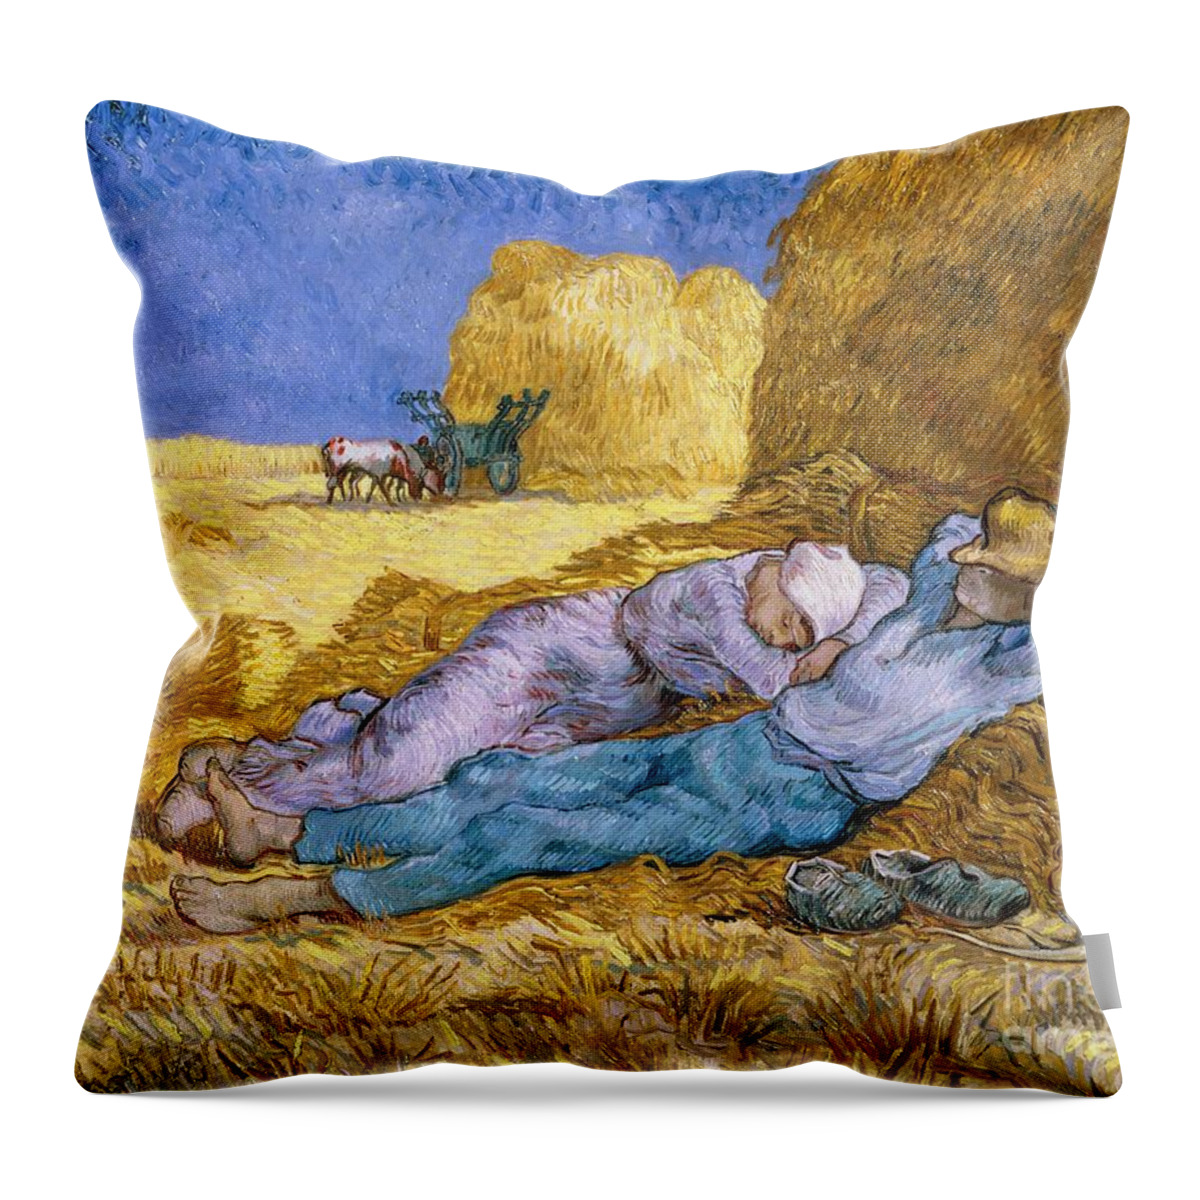 Noon Throw Pillow featuring the painting The Siesta by Vincent Van Gogh